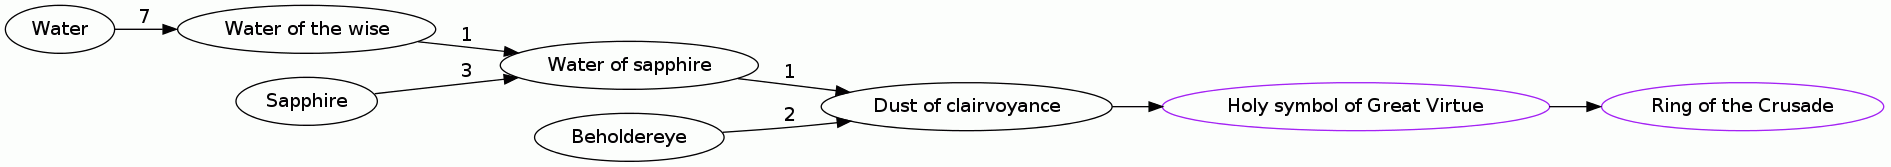 Dust of clairvoyance